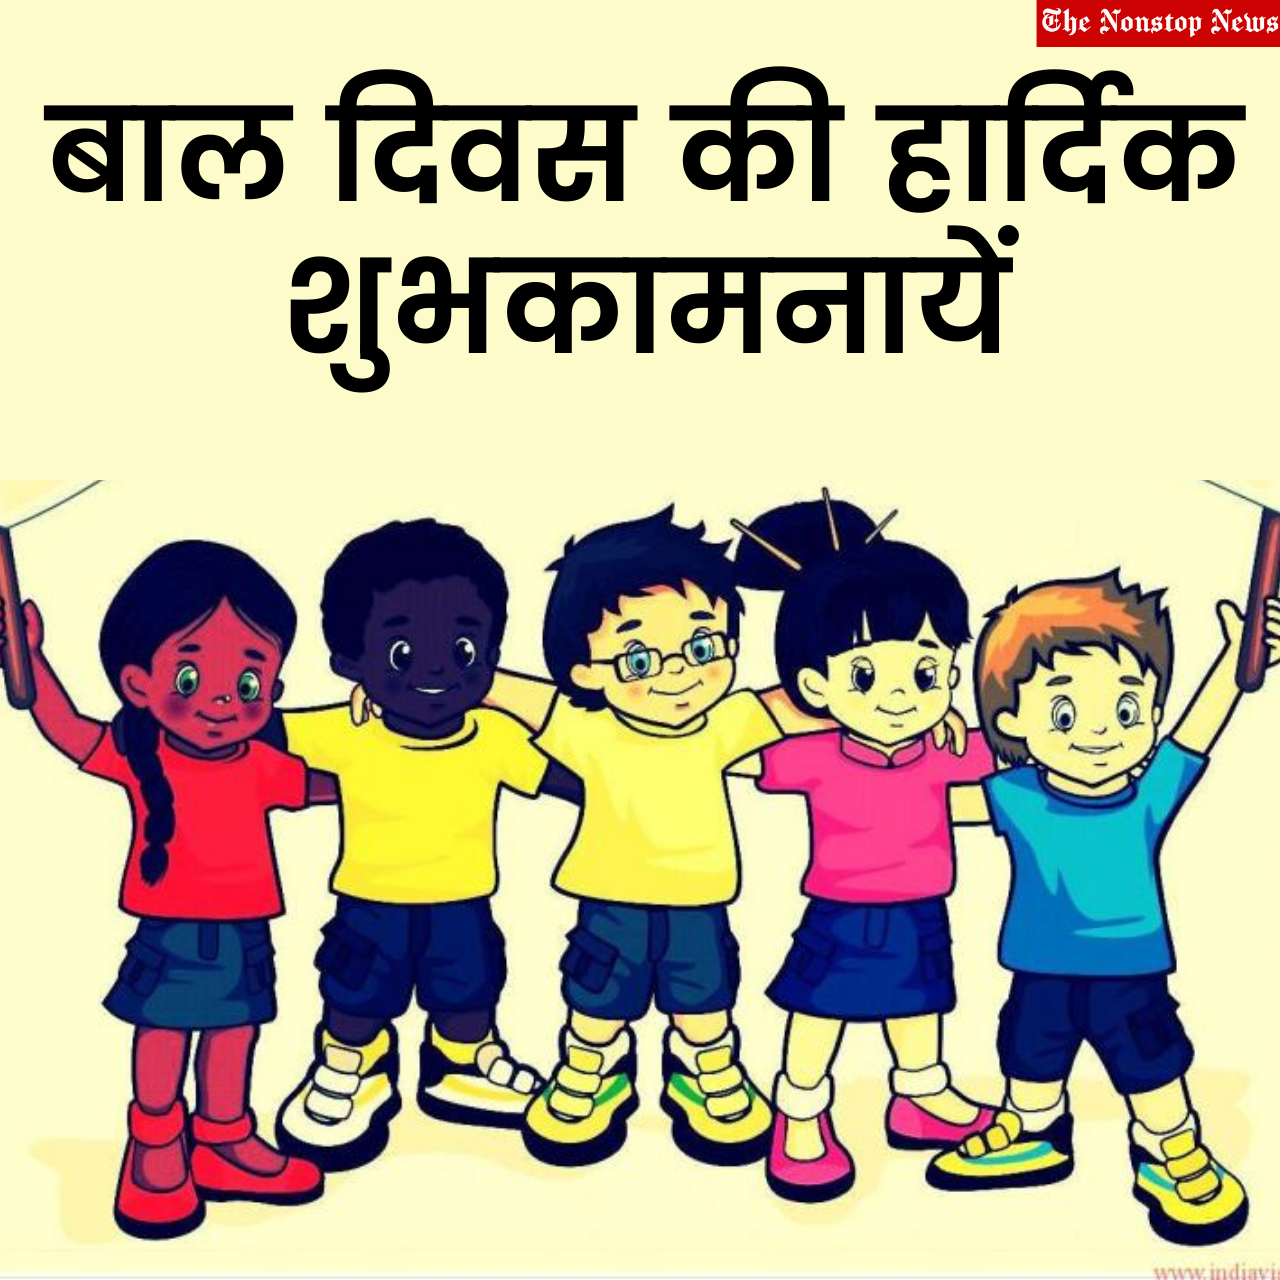 Happy Children's Day 2021 Hindi Wishes, Quotes, Shayari, Status, HD Images, and Messages